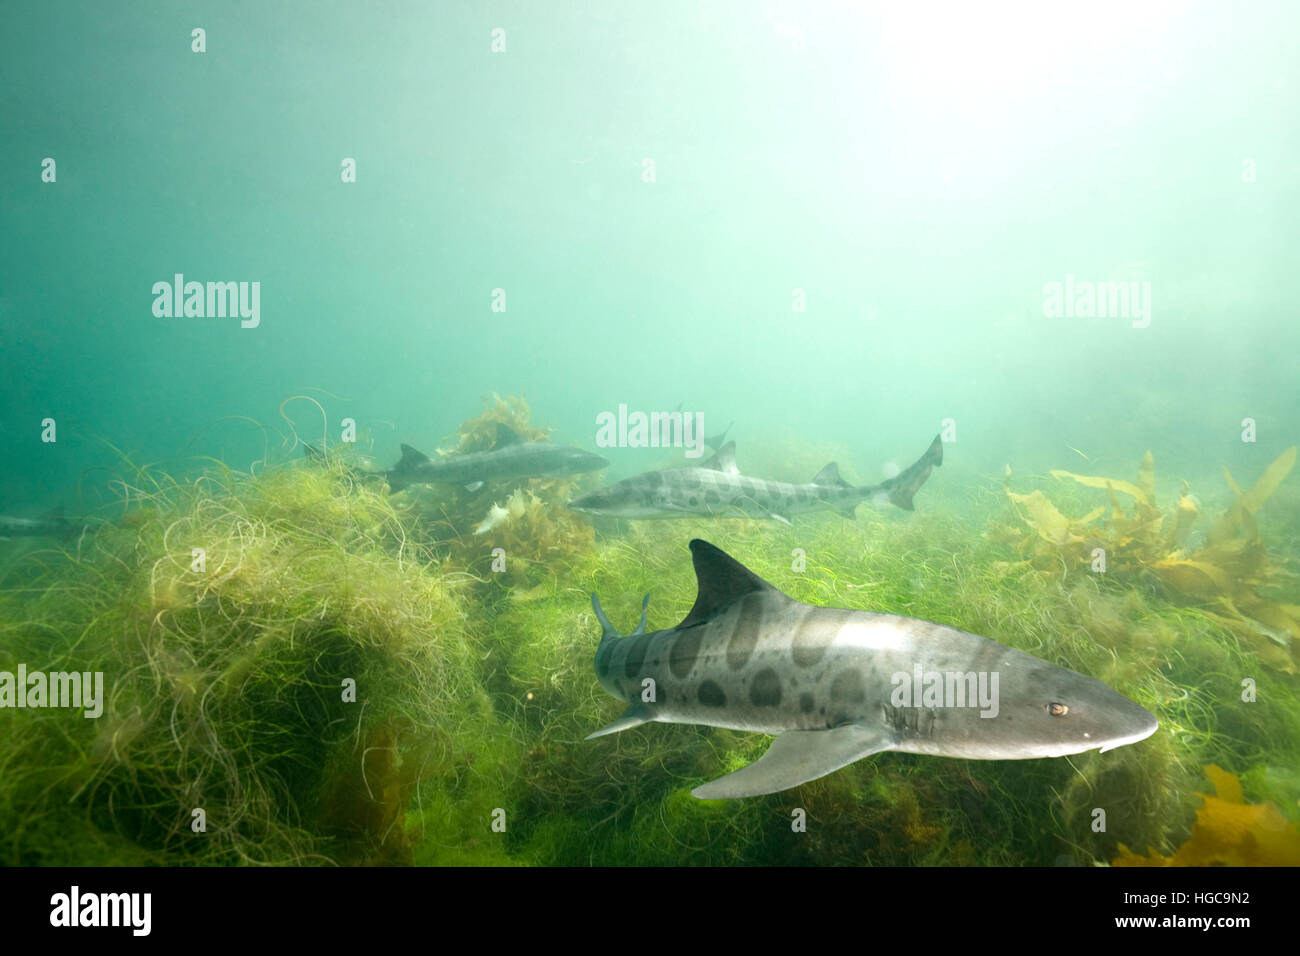 Triakis semifasciata.  An underwater image of a school of leopard sharks swimming near the coast of San Clemente Island of the Channel Islands, CA. Stock Photo